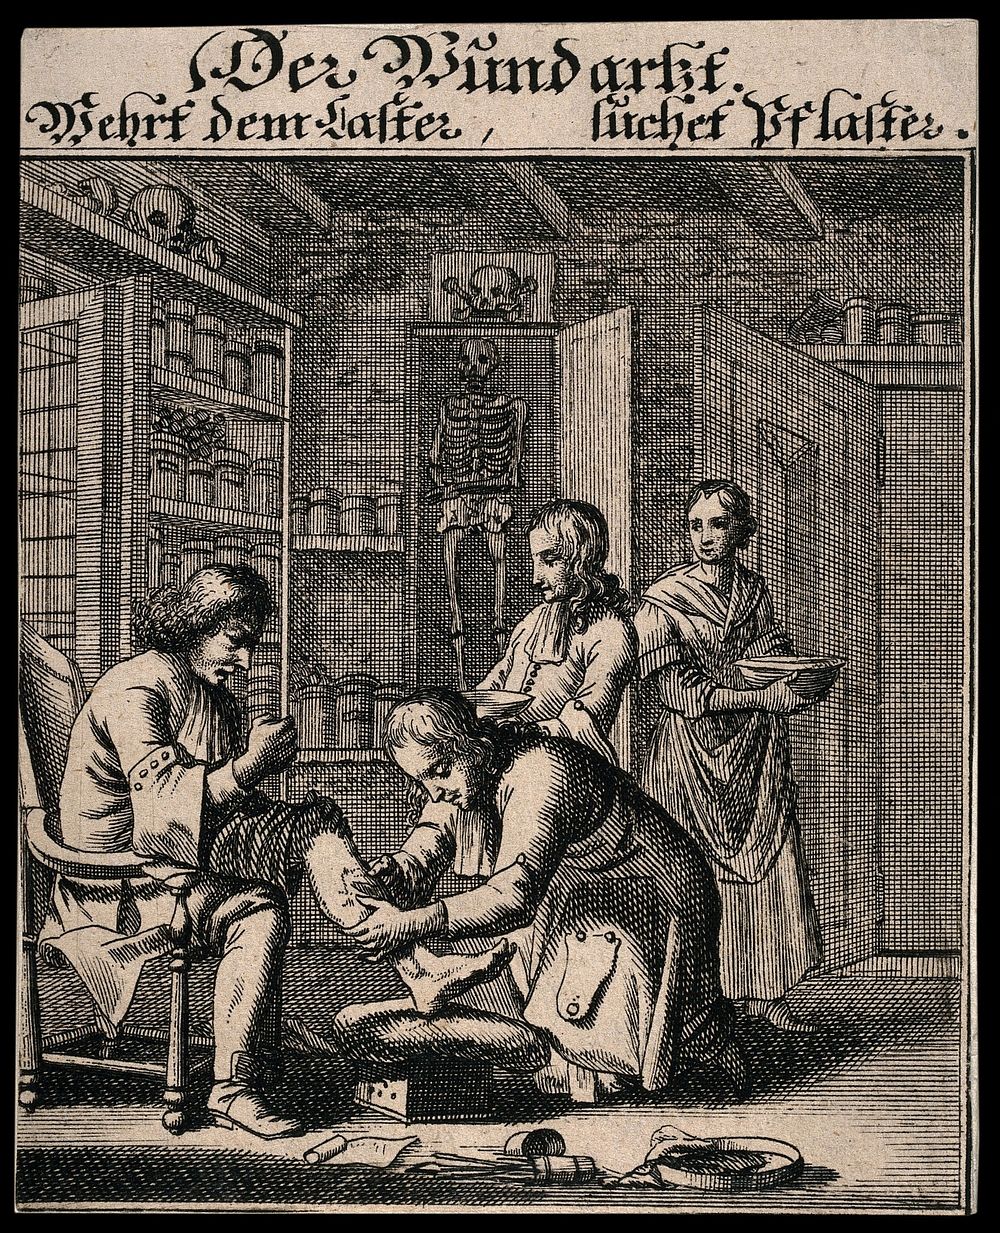 A surgeon treating an irate patient's wounded leg in his surgery assisted by two attendants. Engraving.